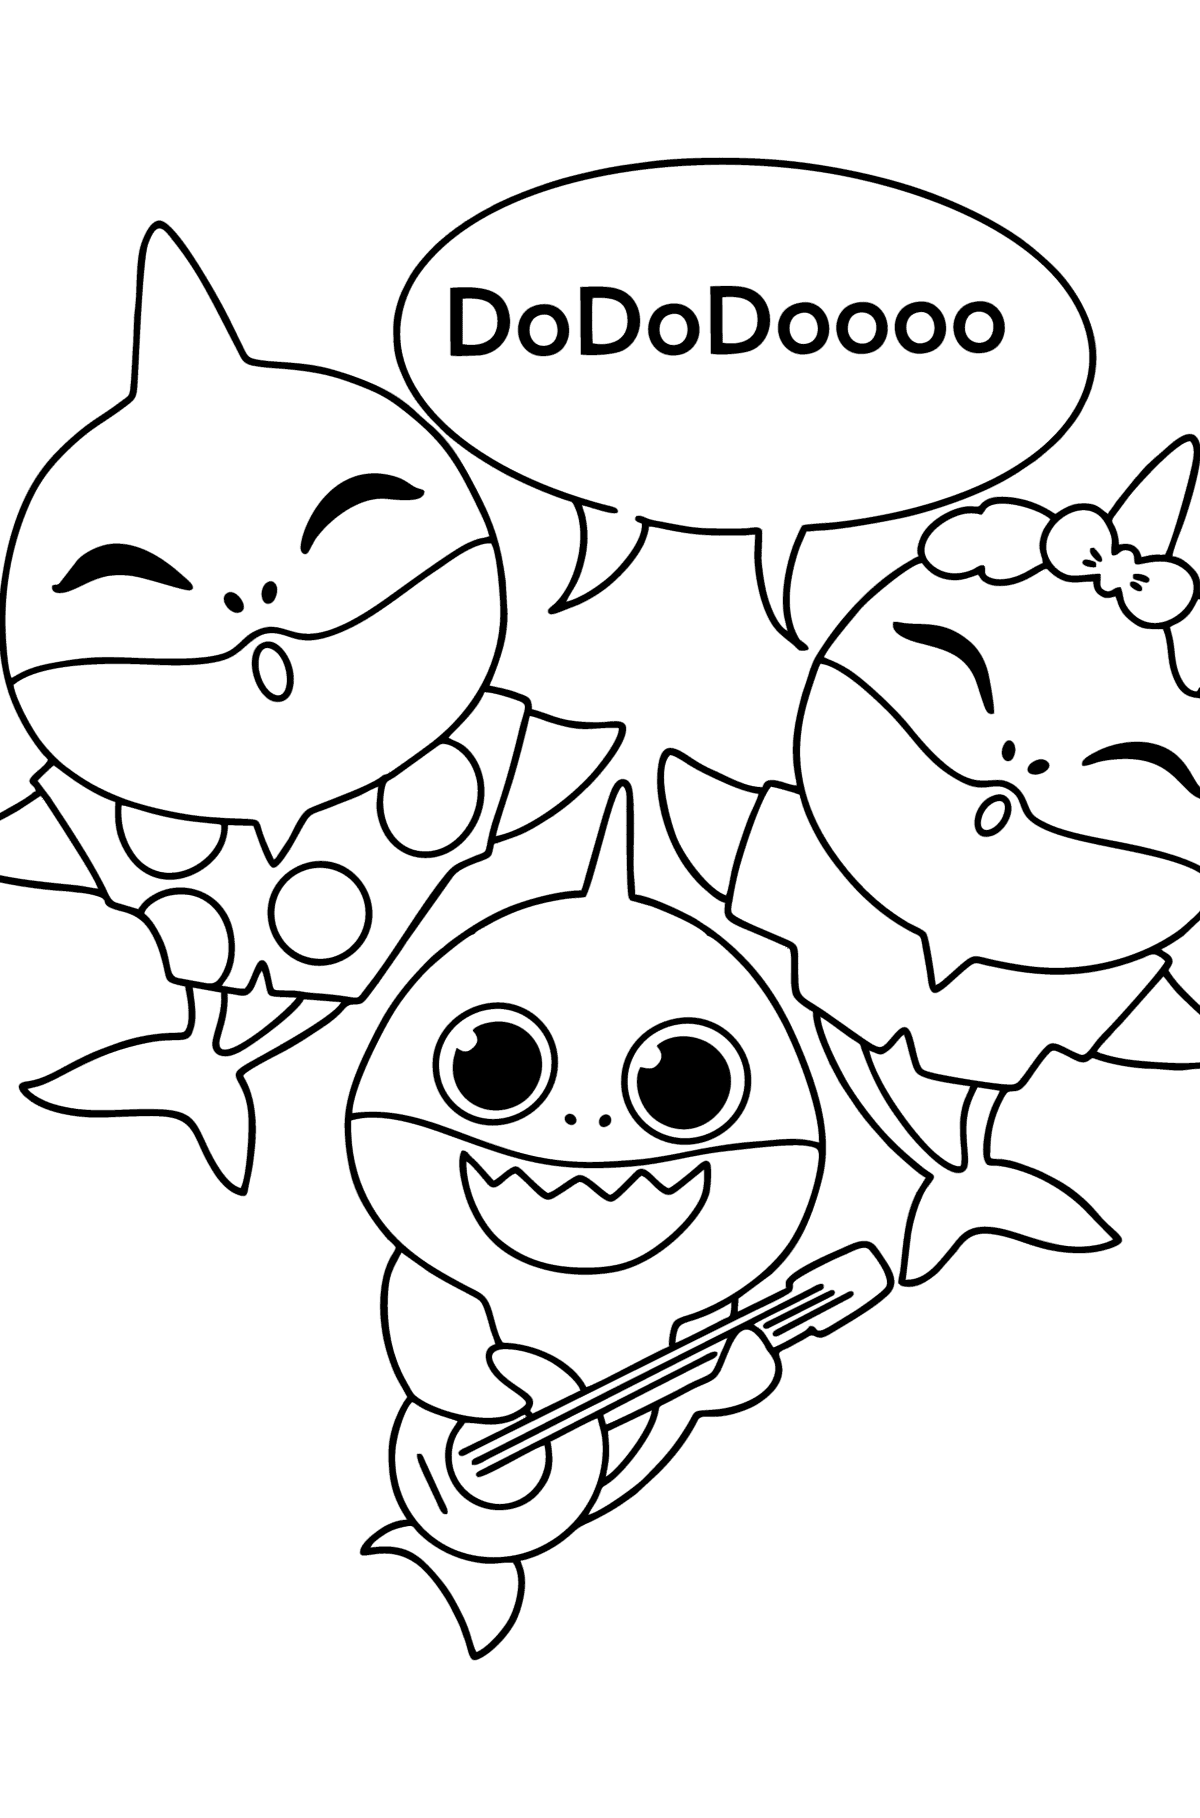 Baby shark Doo doo doo coloring page - Coloring Pages for Kids